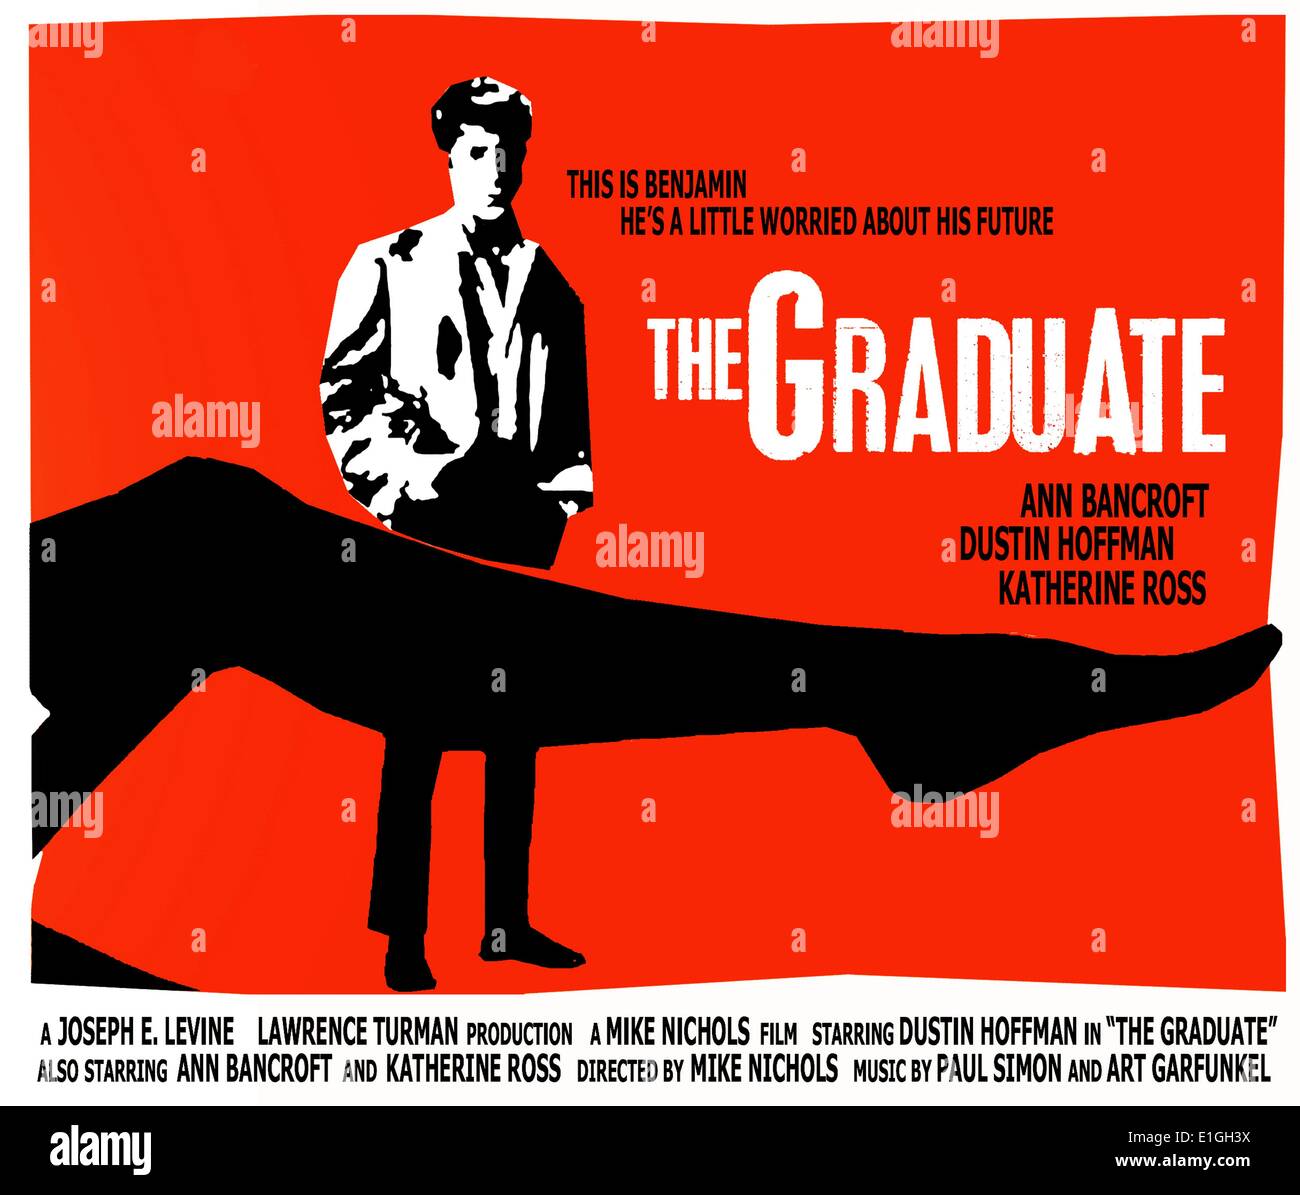 The Graduate, a 1967 comedy drama, starring Anne Bancroft, Dustin Hoffman and Katharine Ross. Stock Photo